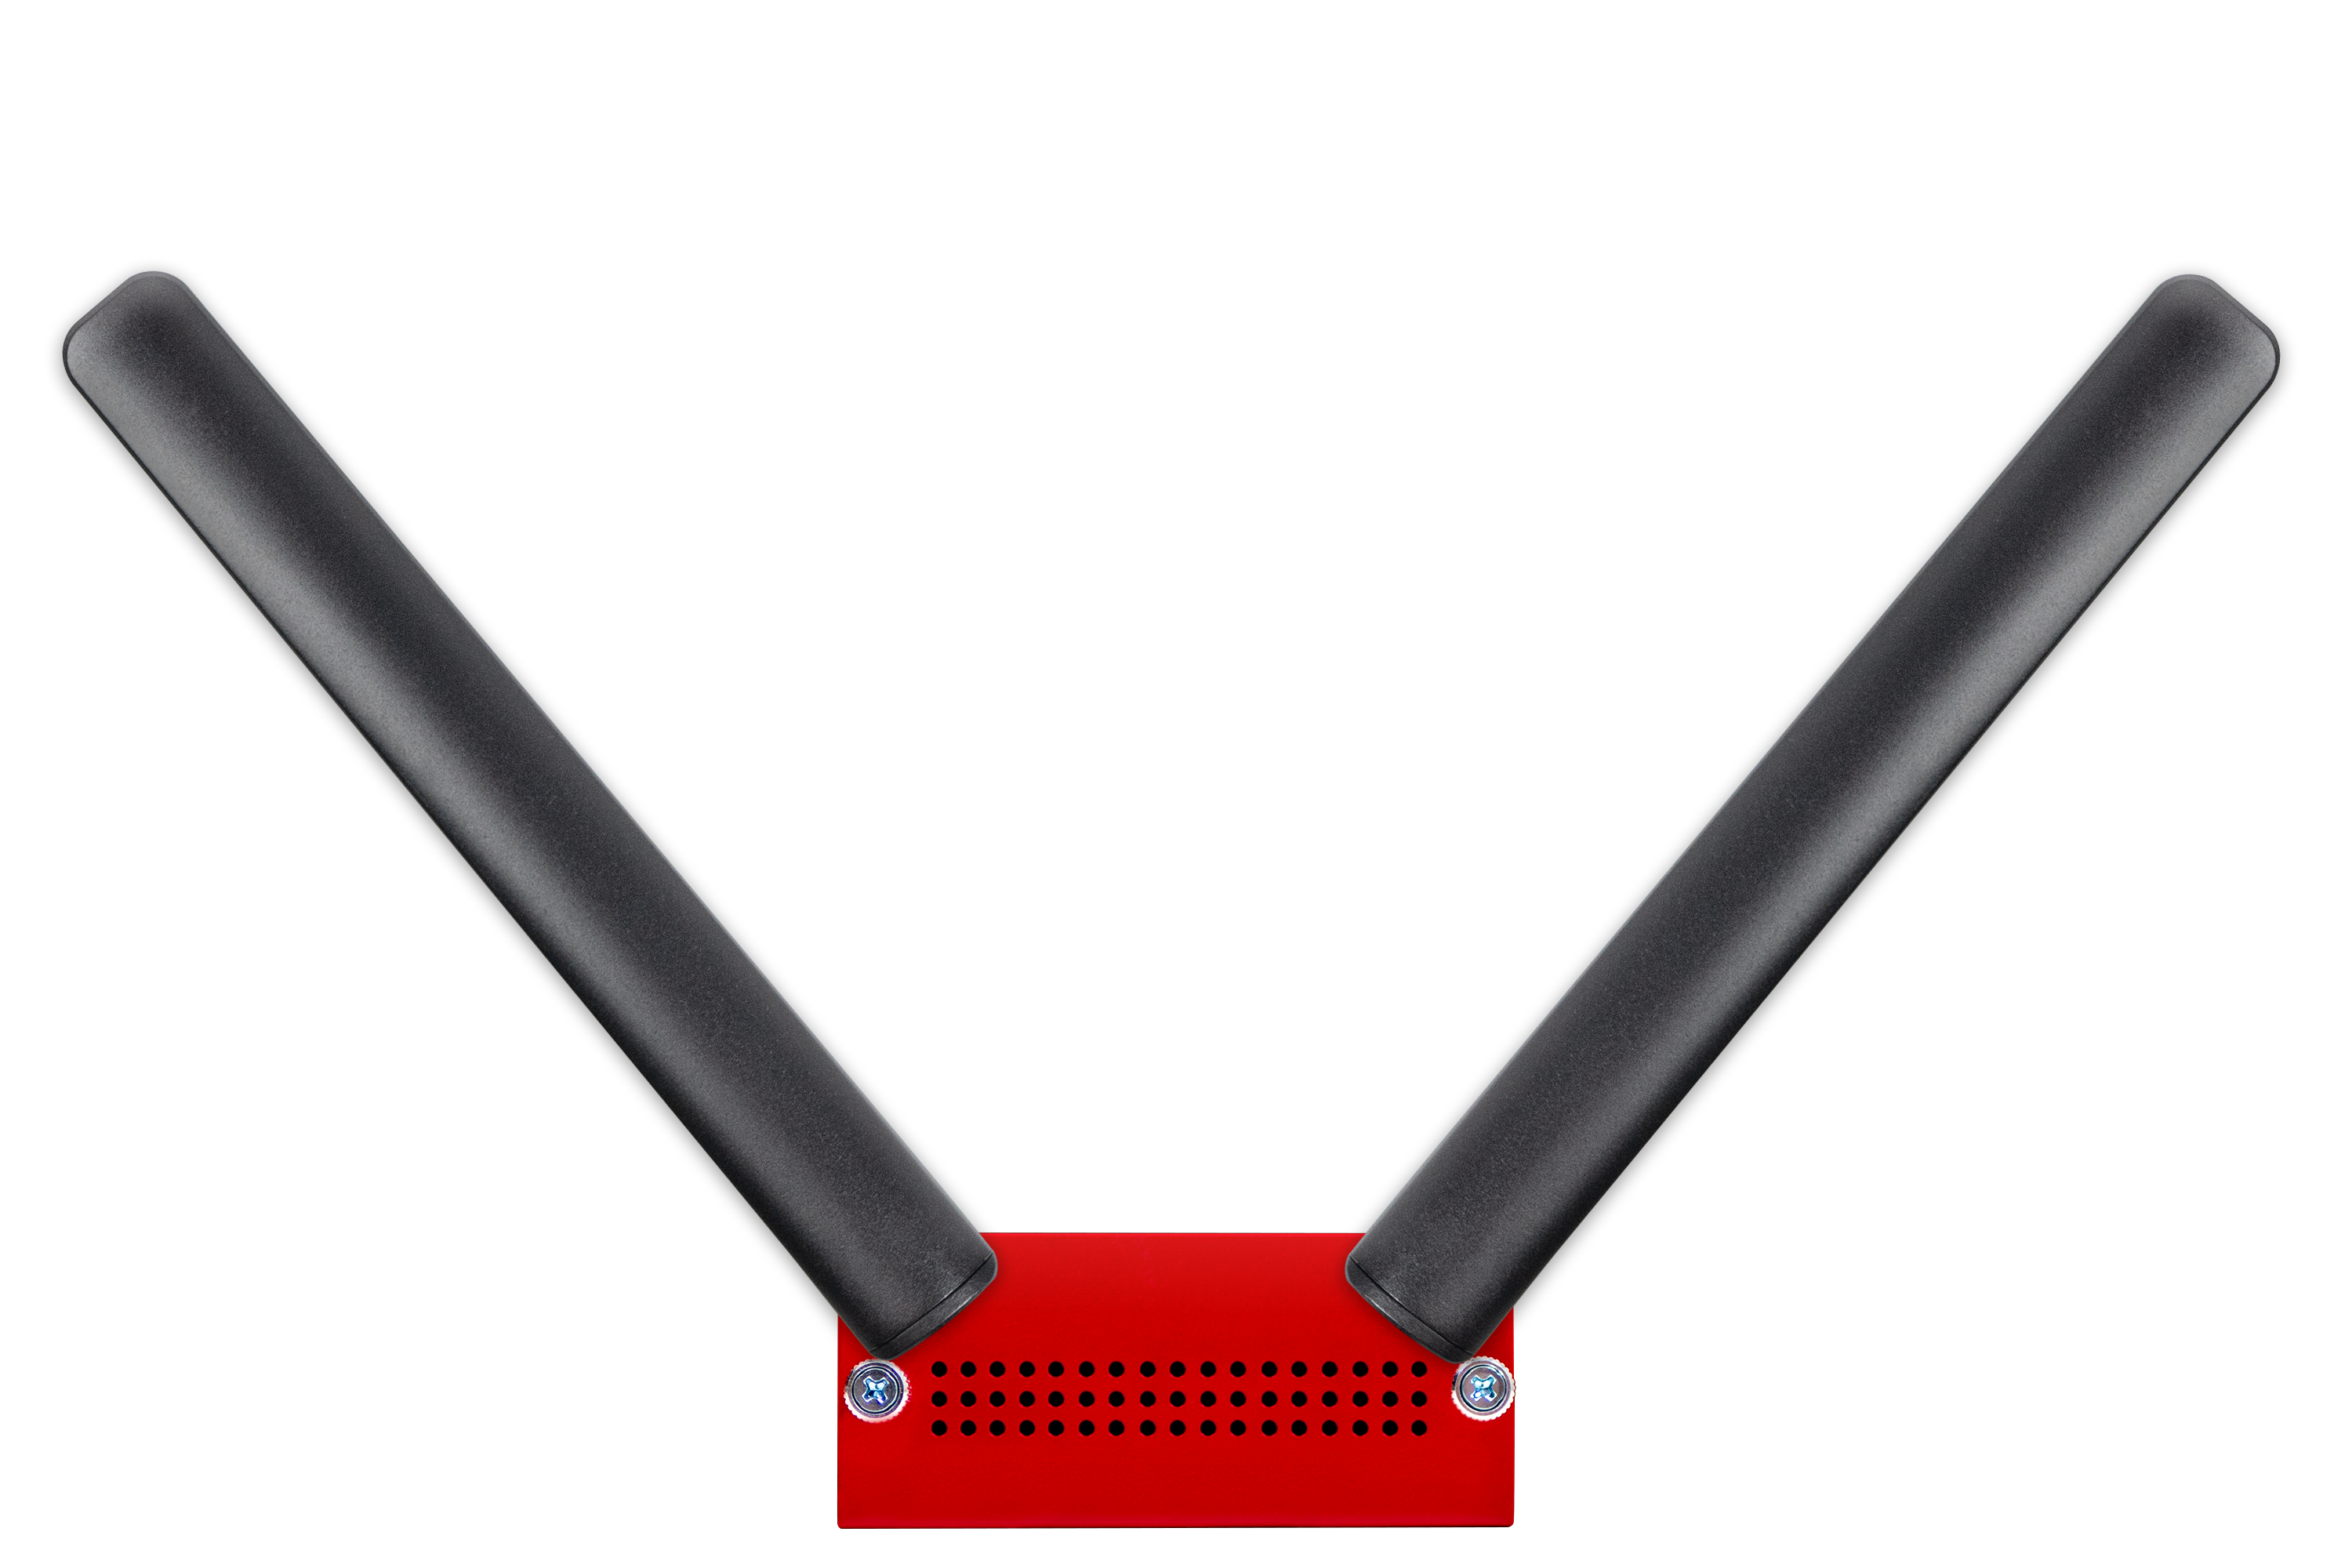 Image of the LTE Module with antennas at a 45 degree angle